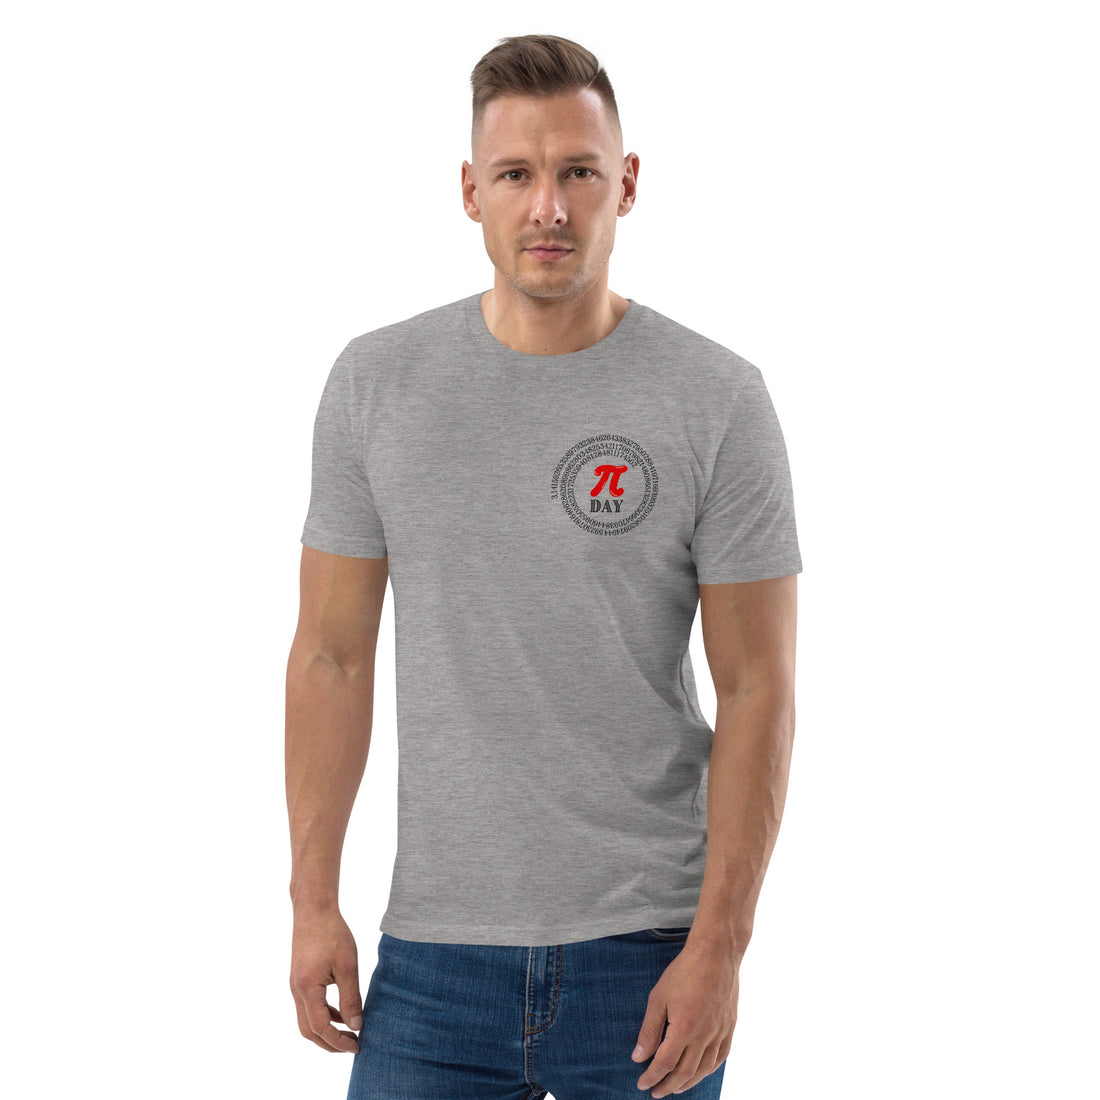 Pi Day Graphic Cotton T-shirt